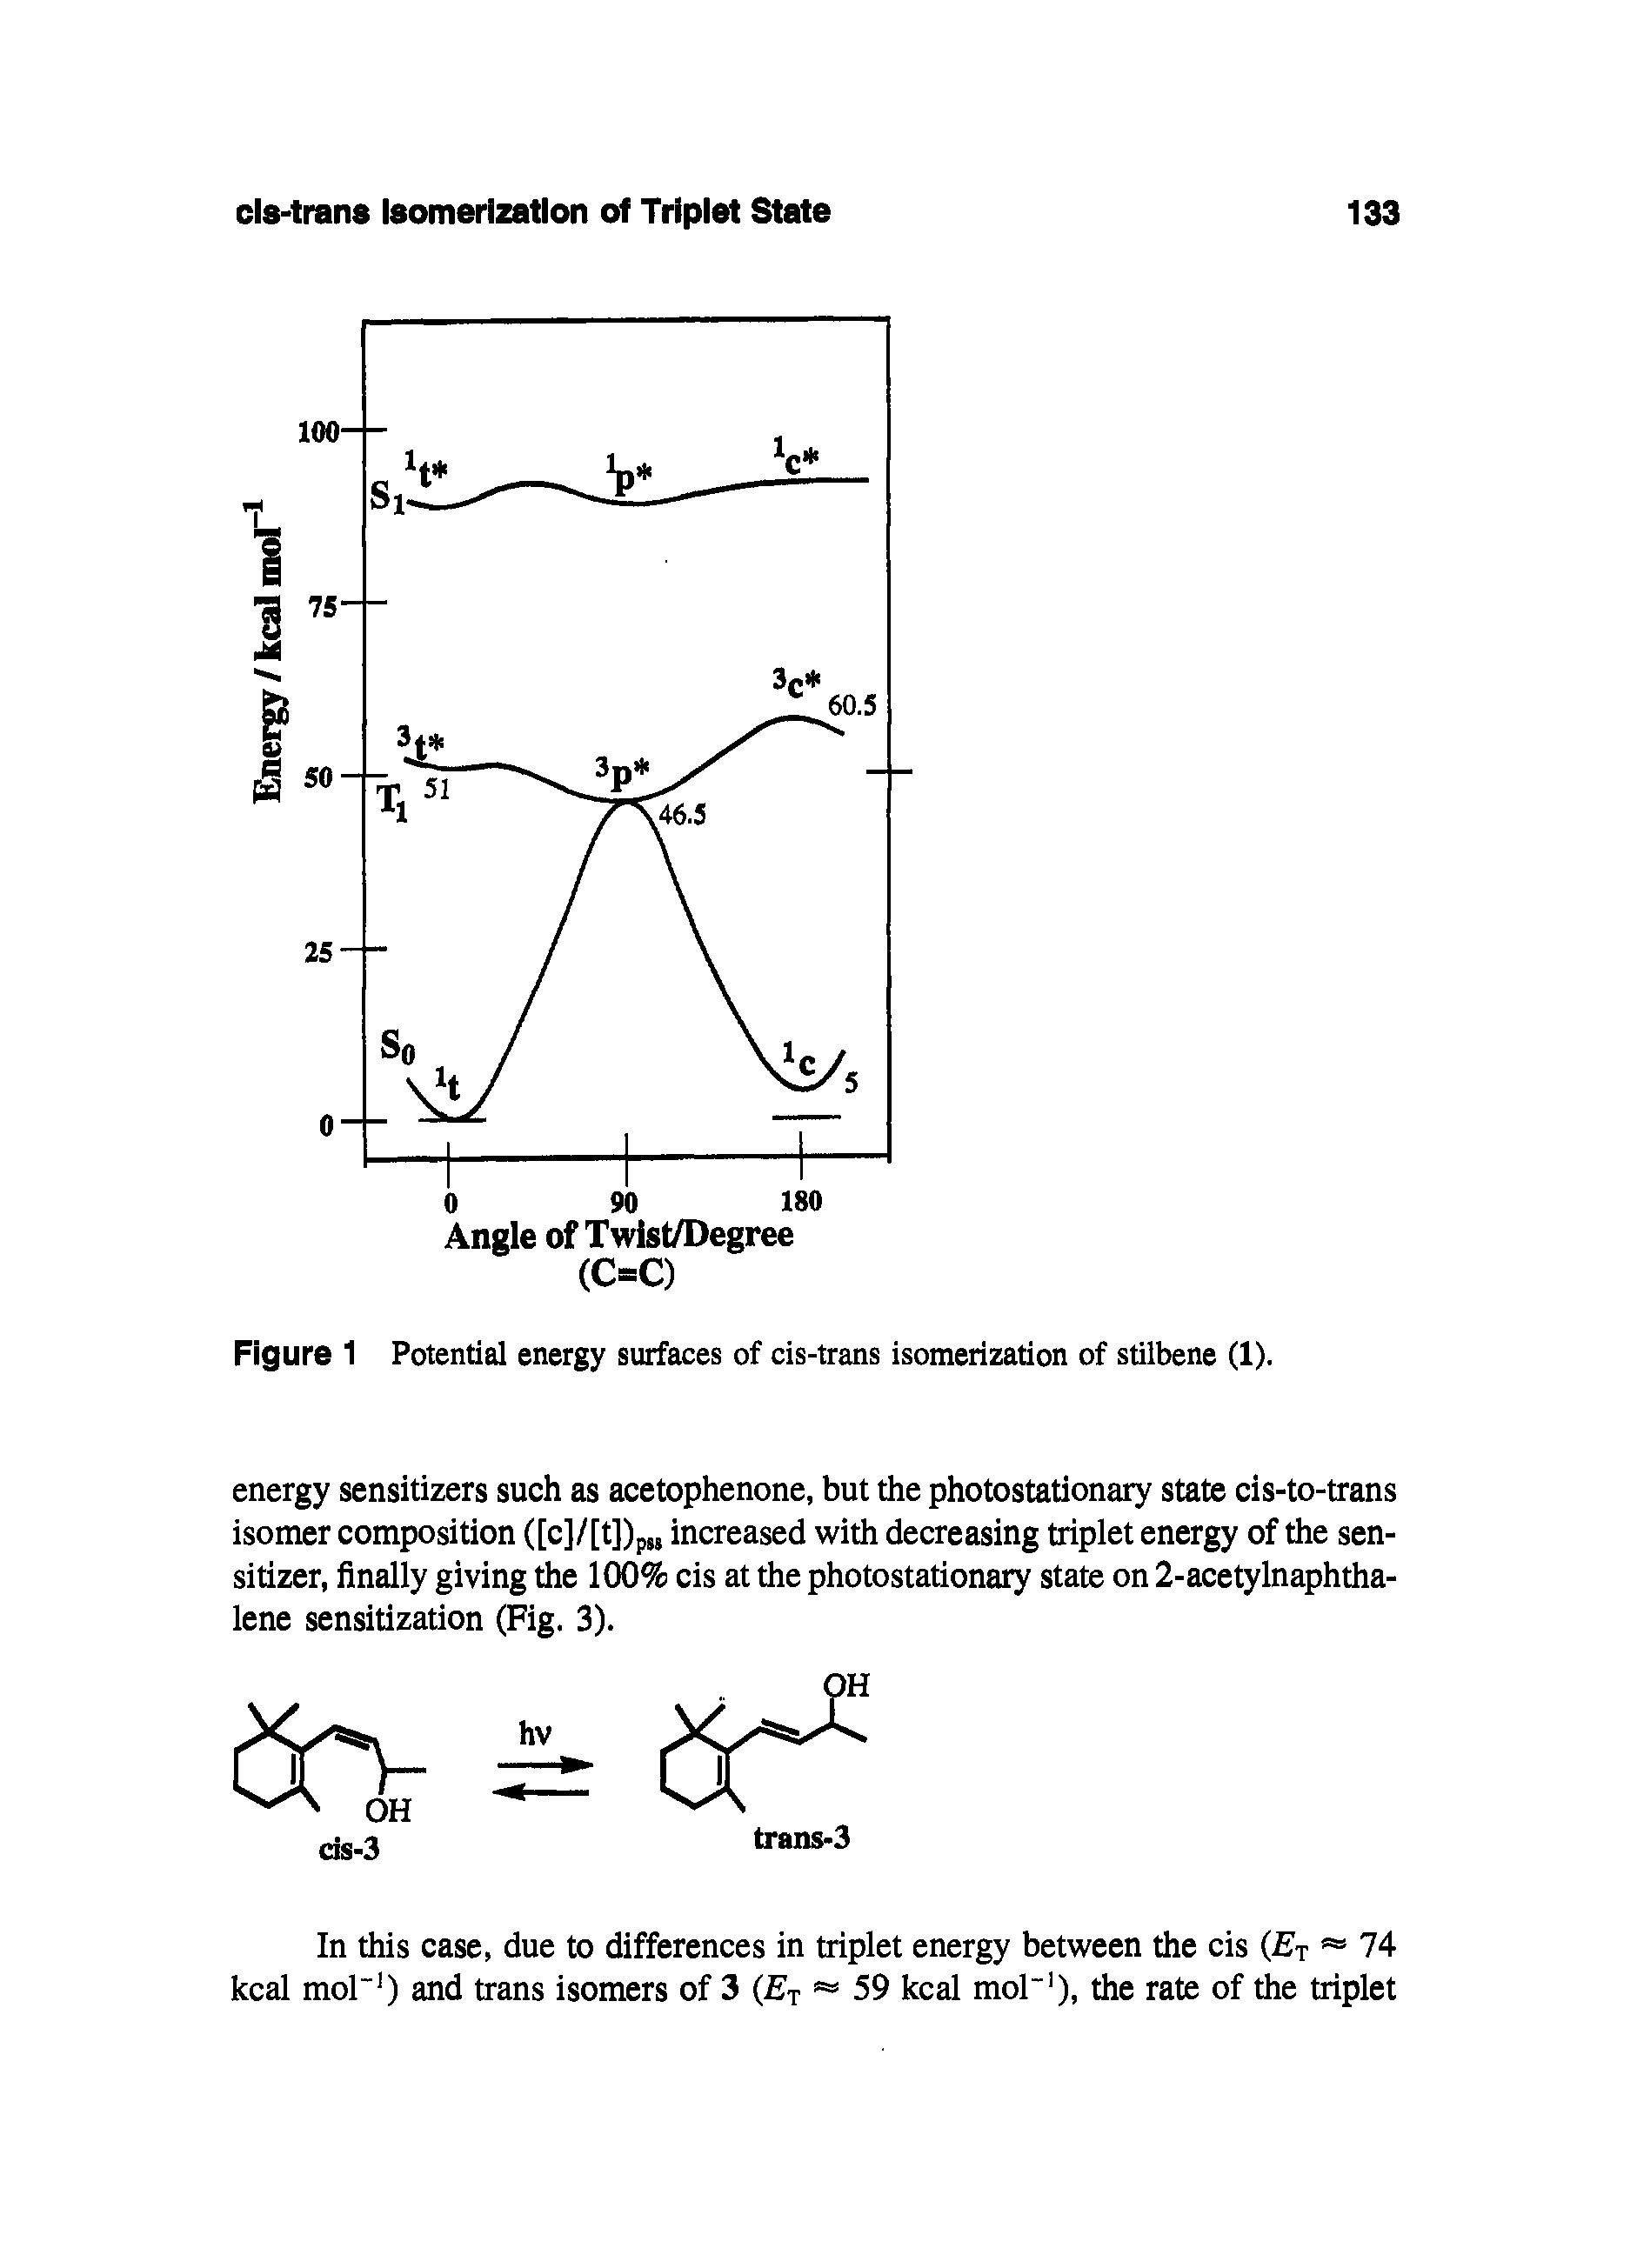 Figure 1 Potential energy surfaces of cis-trans isomerization of stilbene (1).